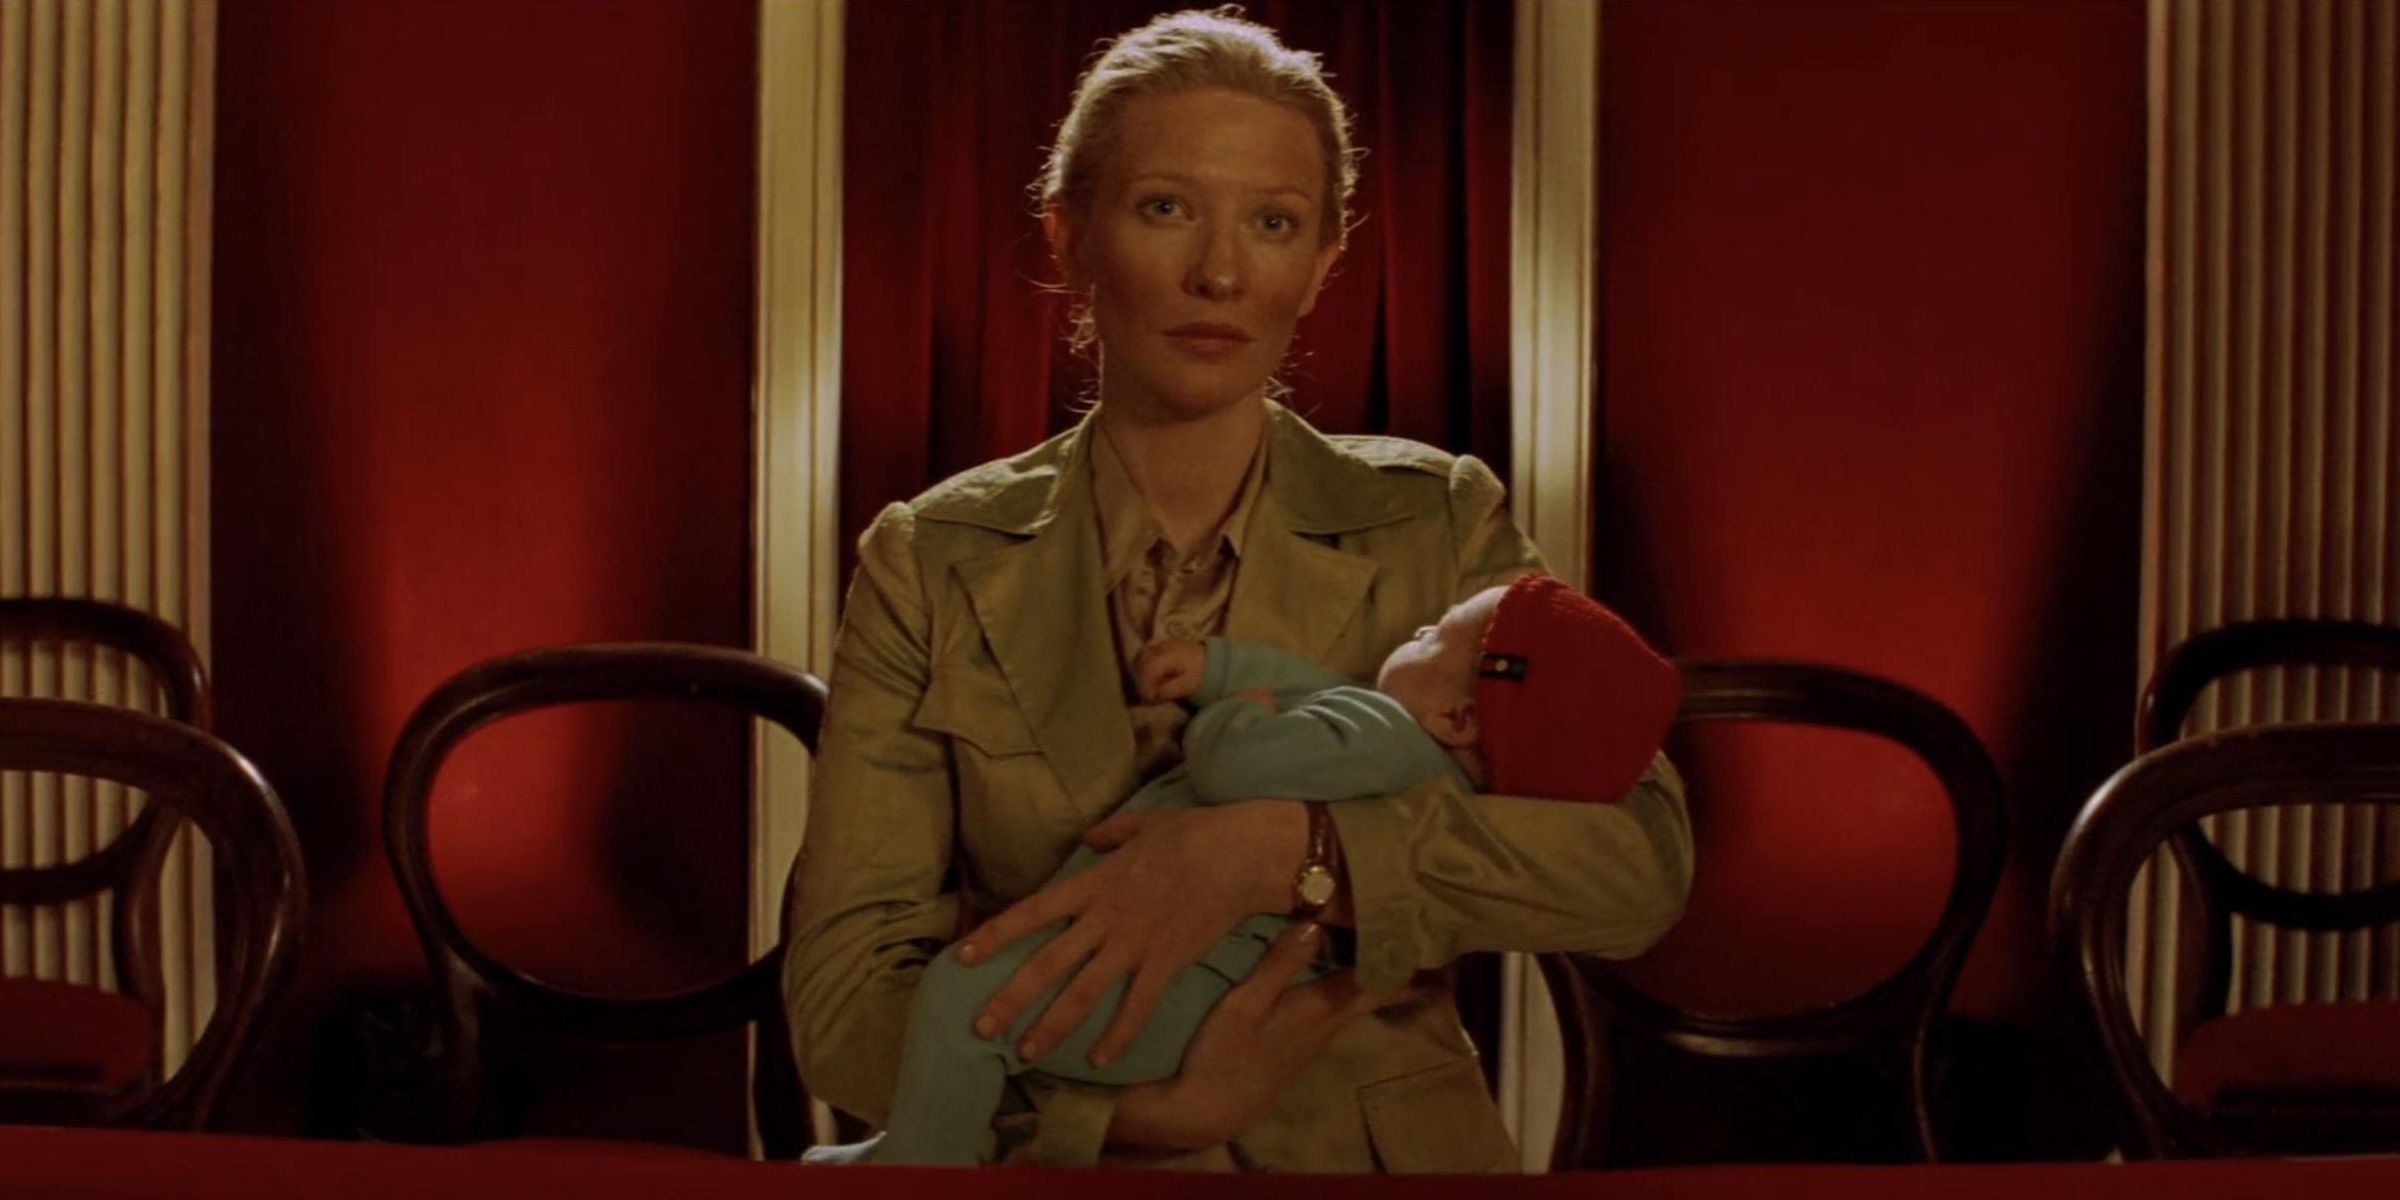 Jane holding her baby in a movie theater in The Life Aquatic.